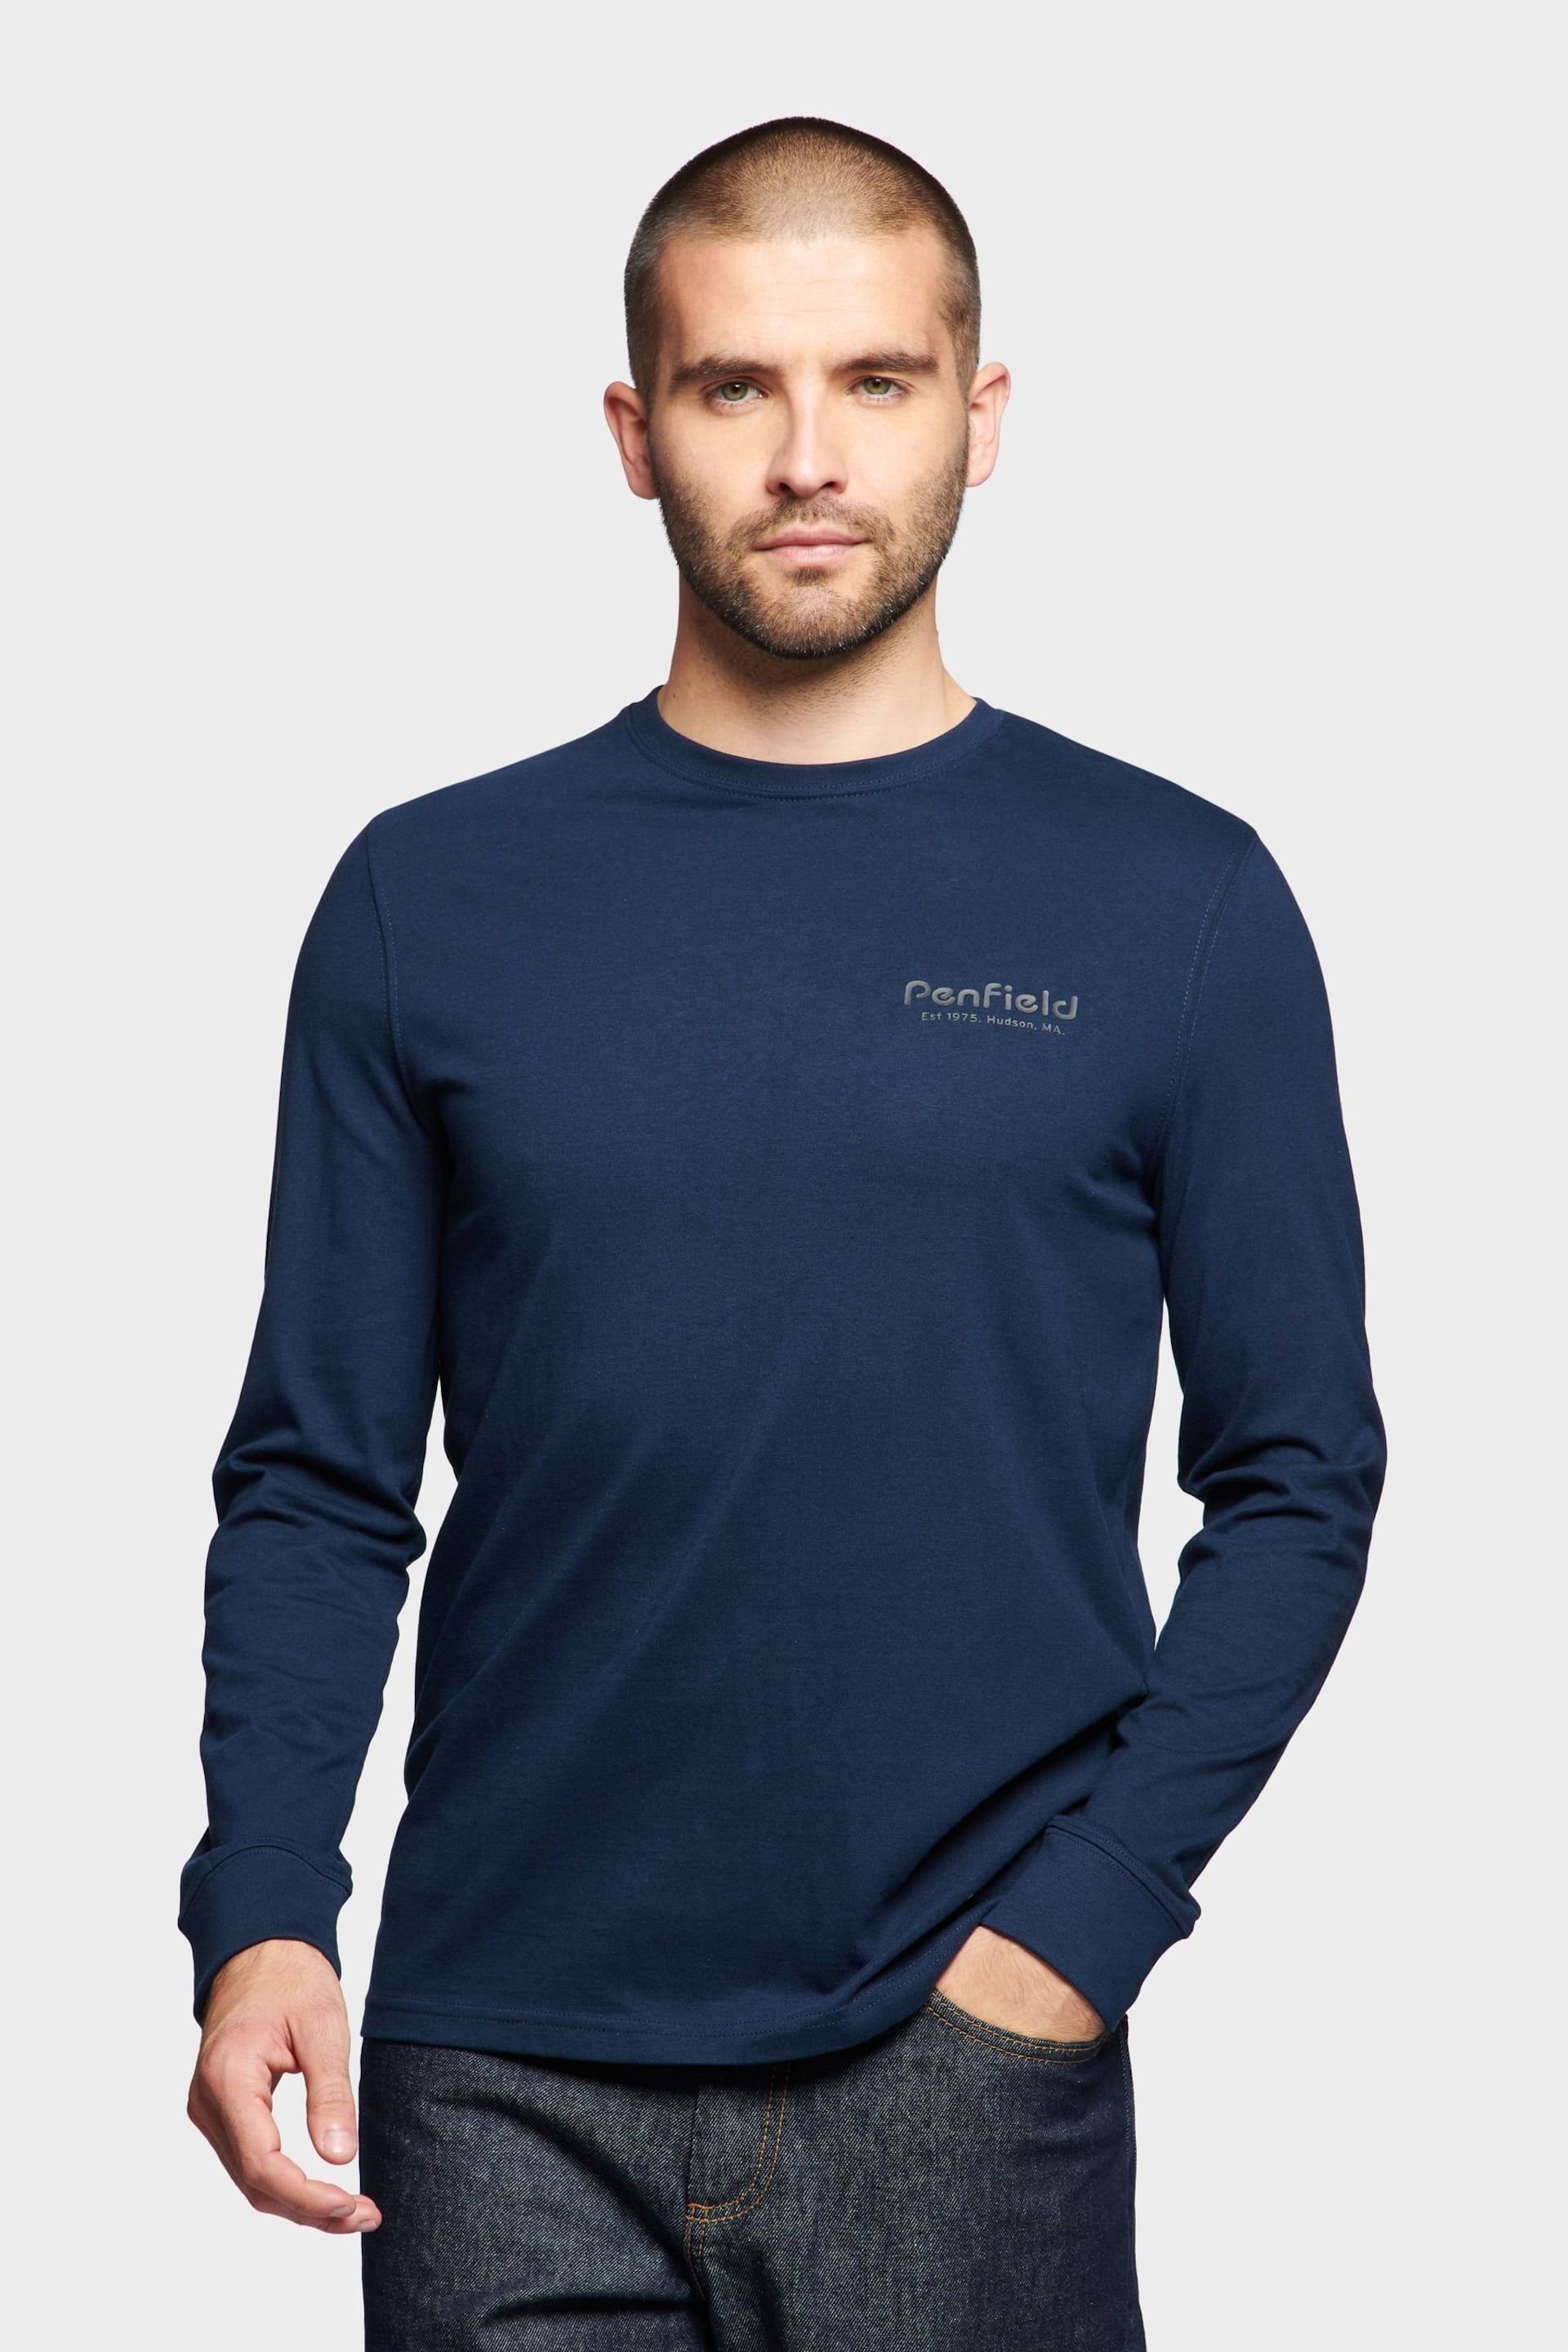 Penfield Blue Arc Mountain Back Graphic Long-Sleeved T-Shirt - Image 1 of 10